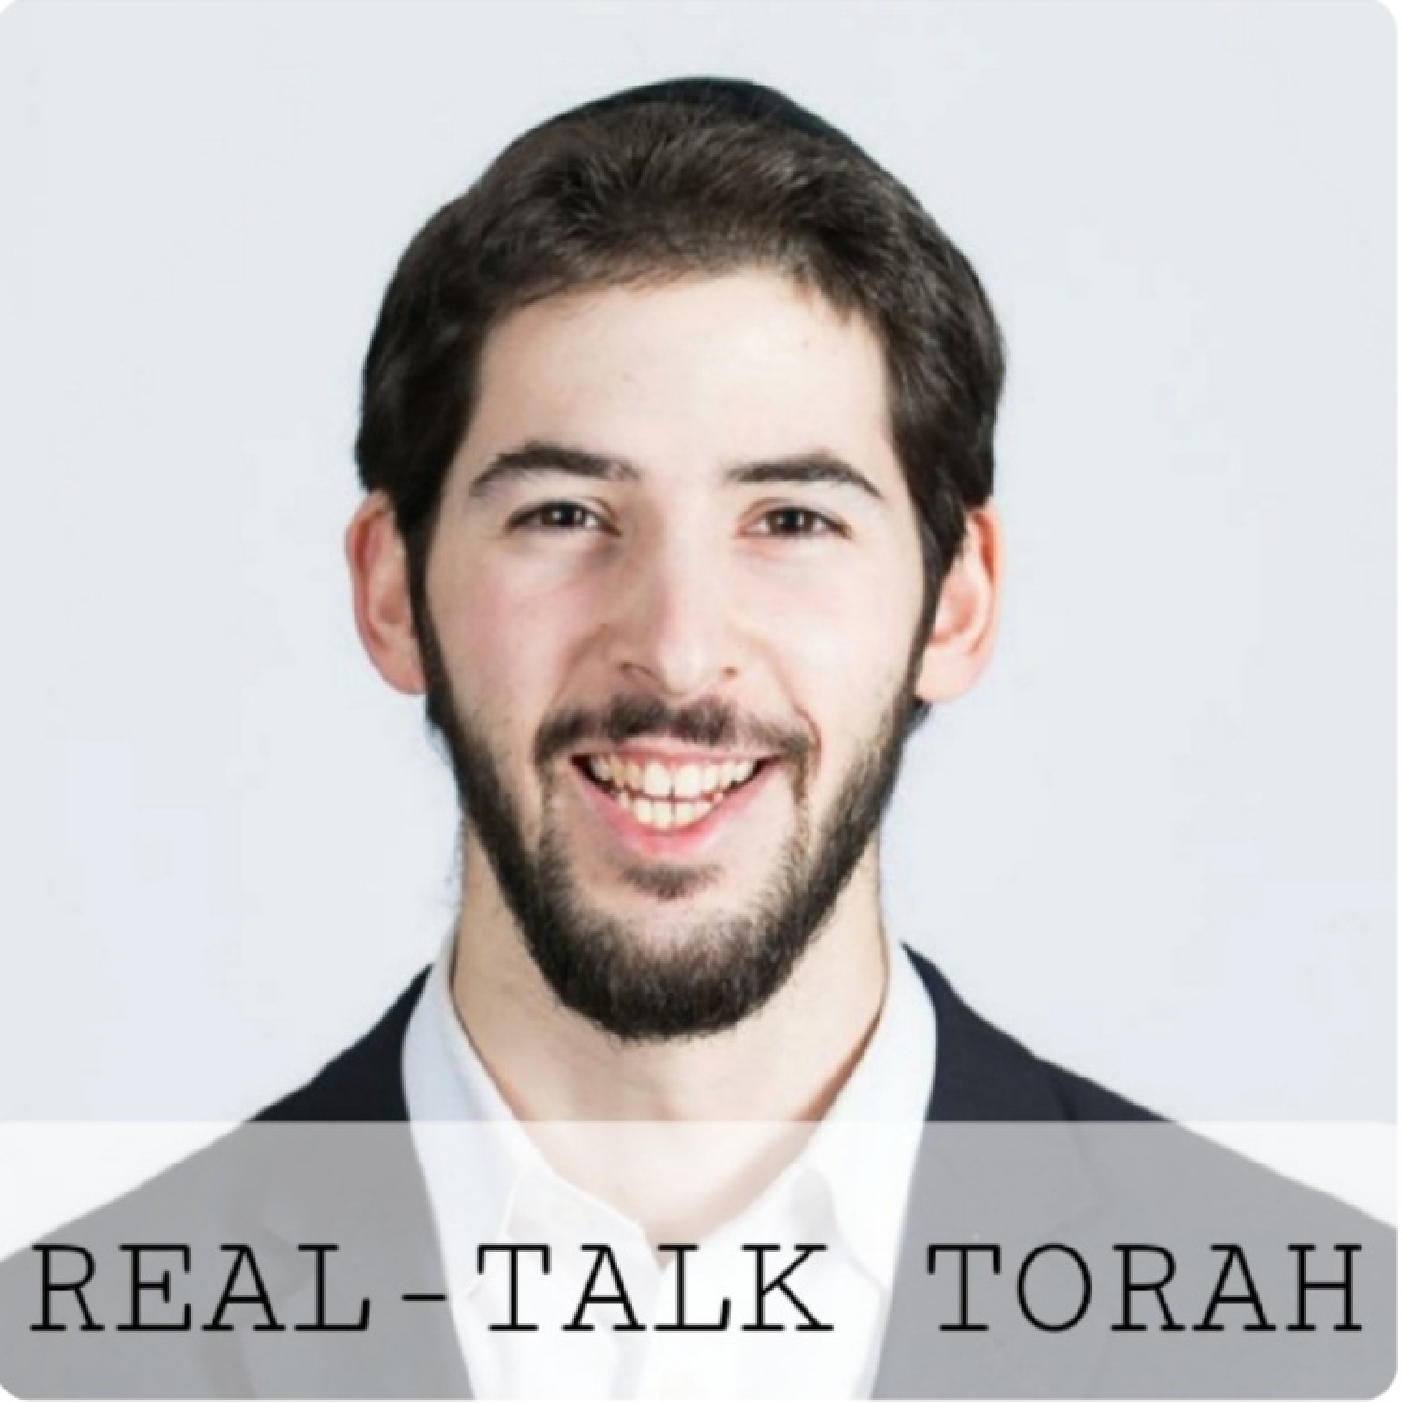 Real-Talk Torah: What Should One Learn on Shavuos Night? 📜🩹